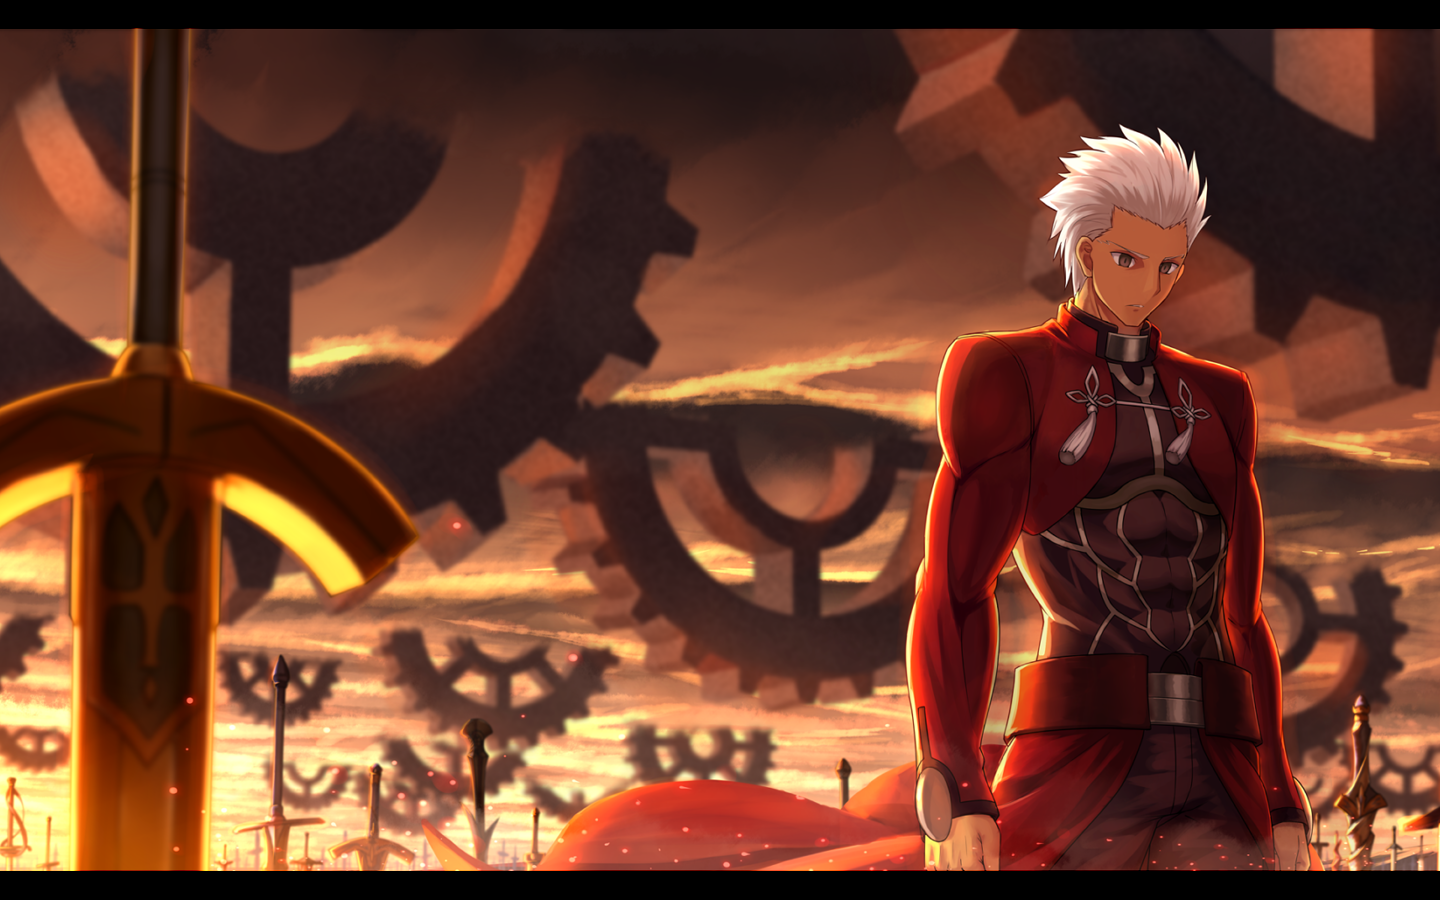 Anime 1440x900 Archer (Fate/Stay Night) Fate series Fate/Stay Night anime